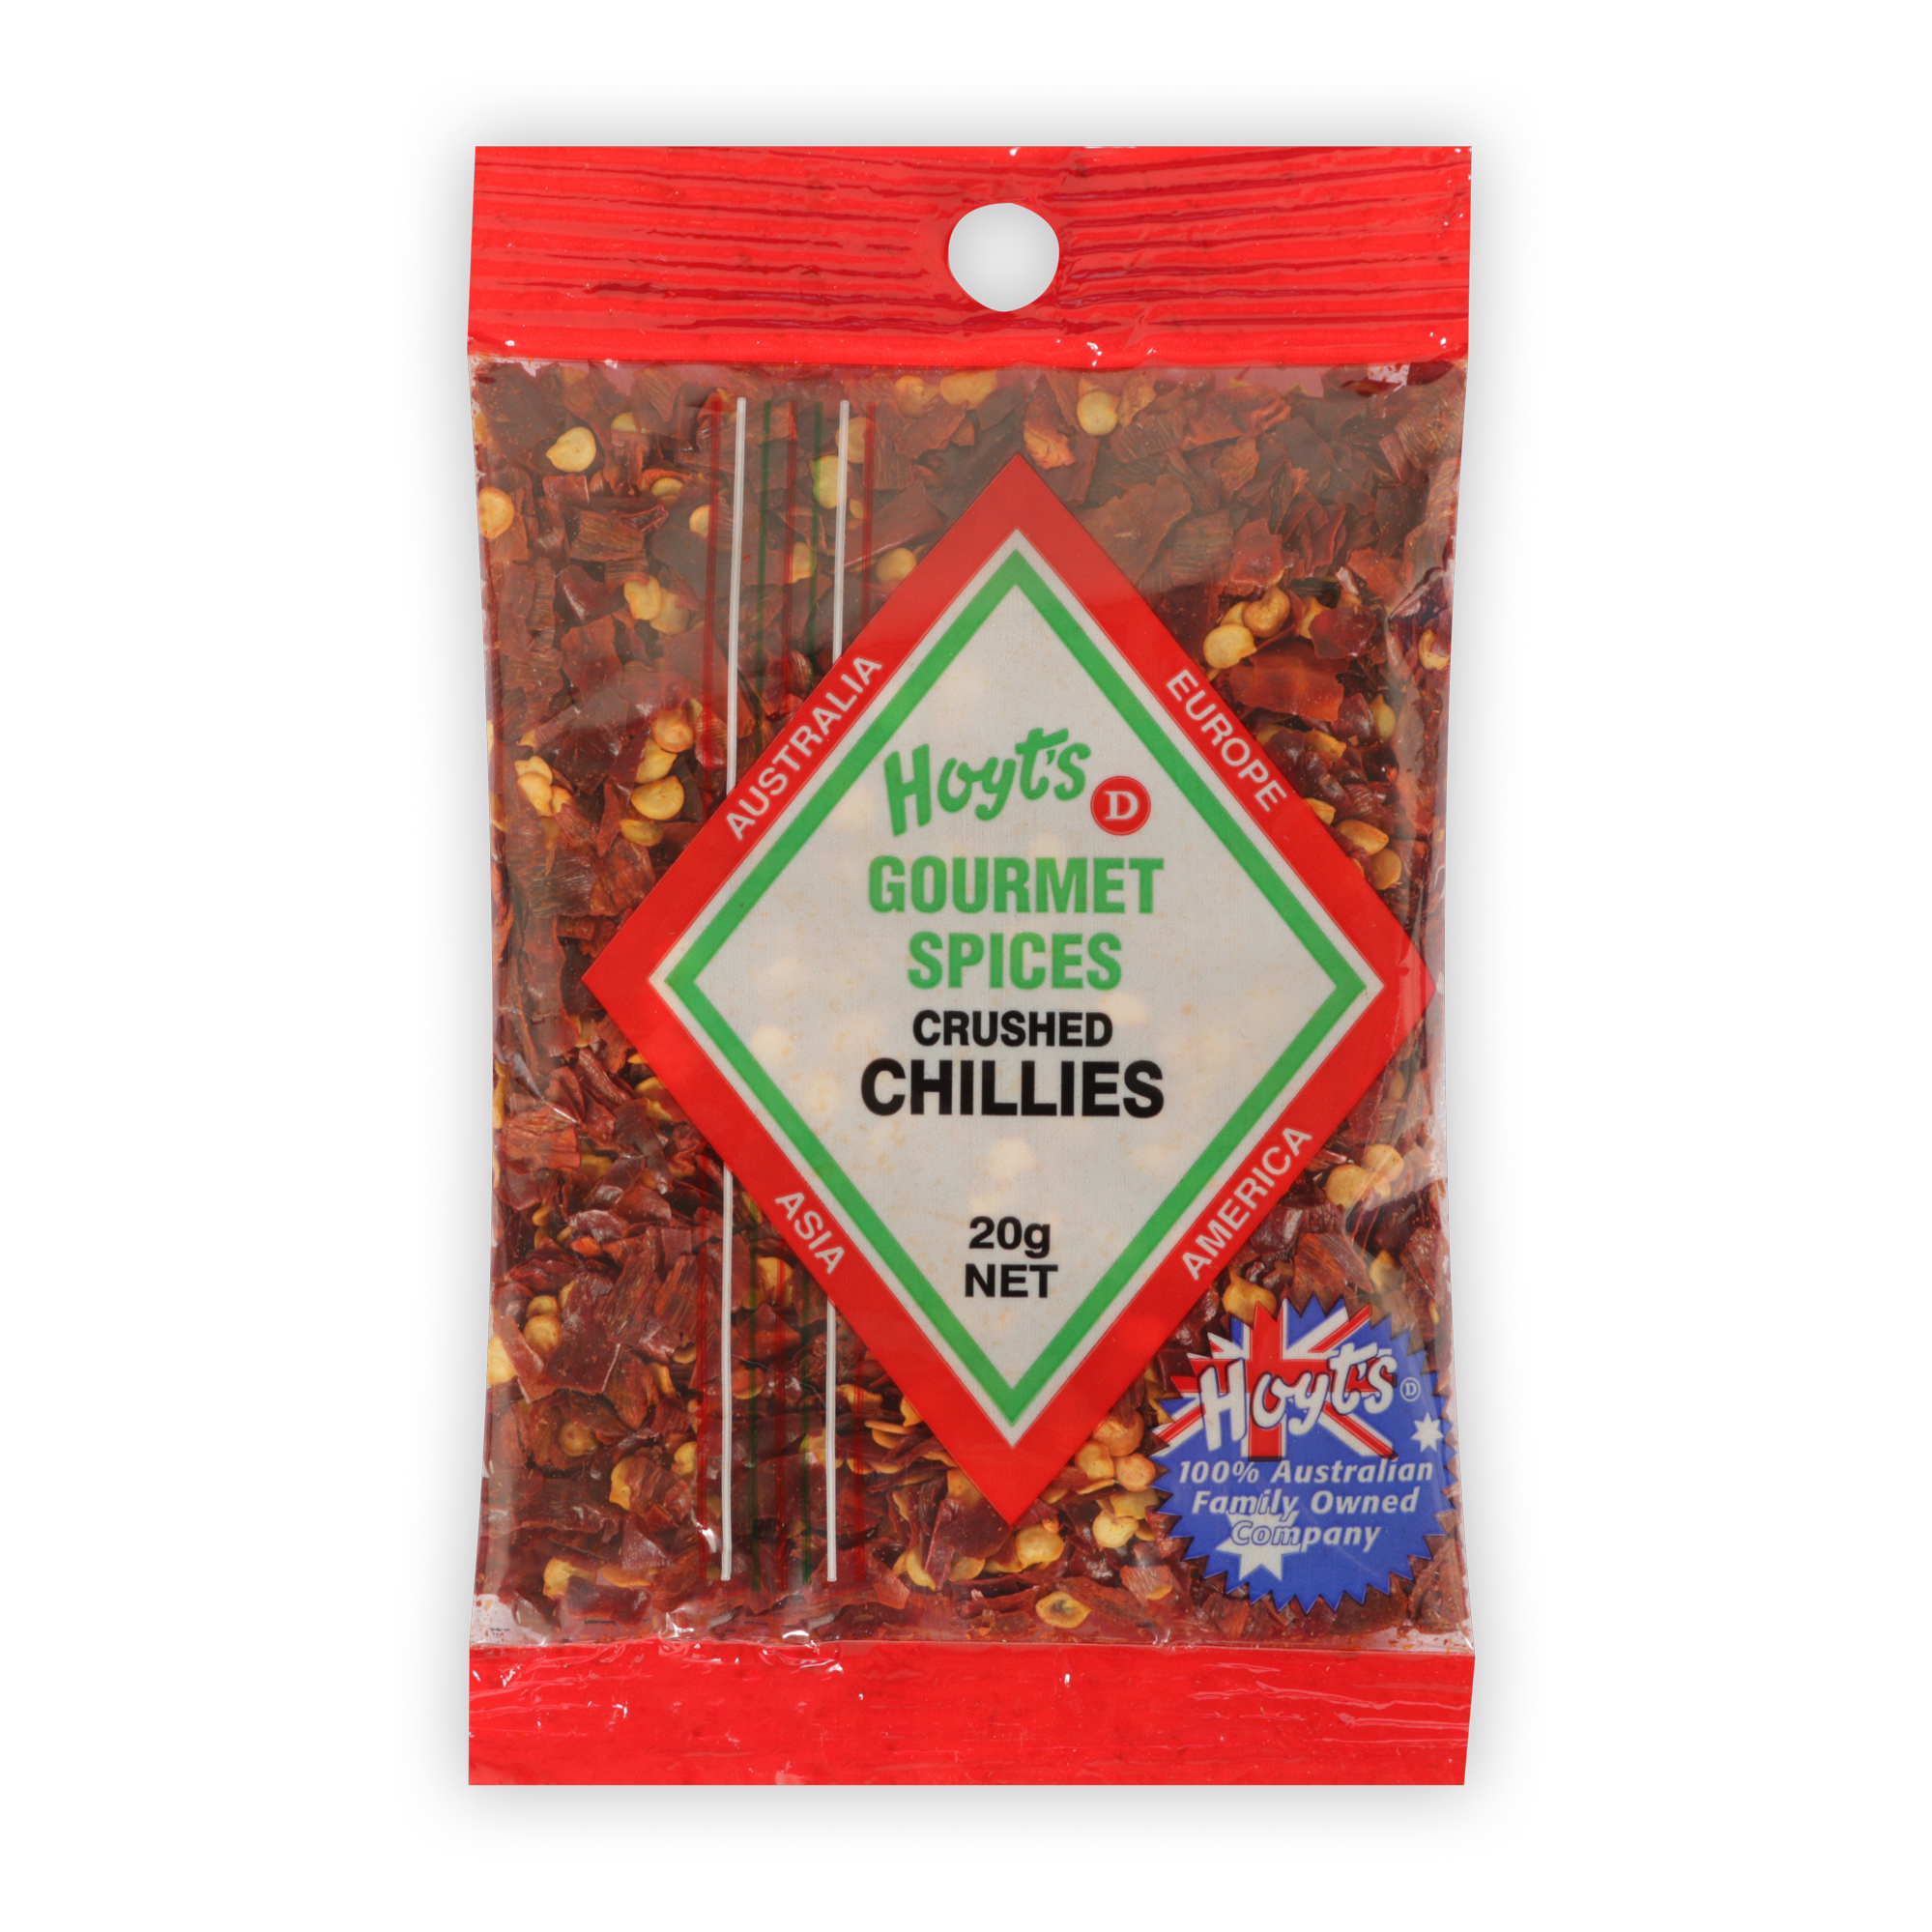 Gourmet Chillies Crushed 20g - 9300725010089 1